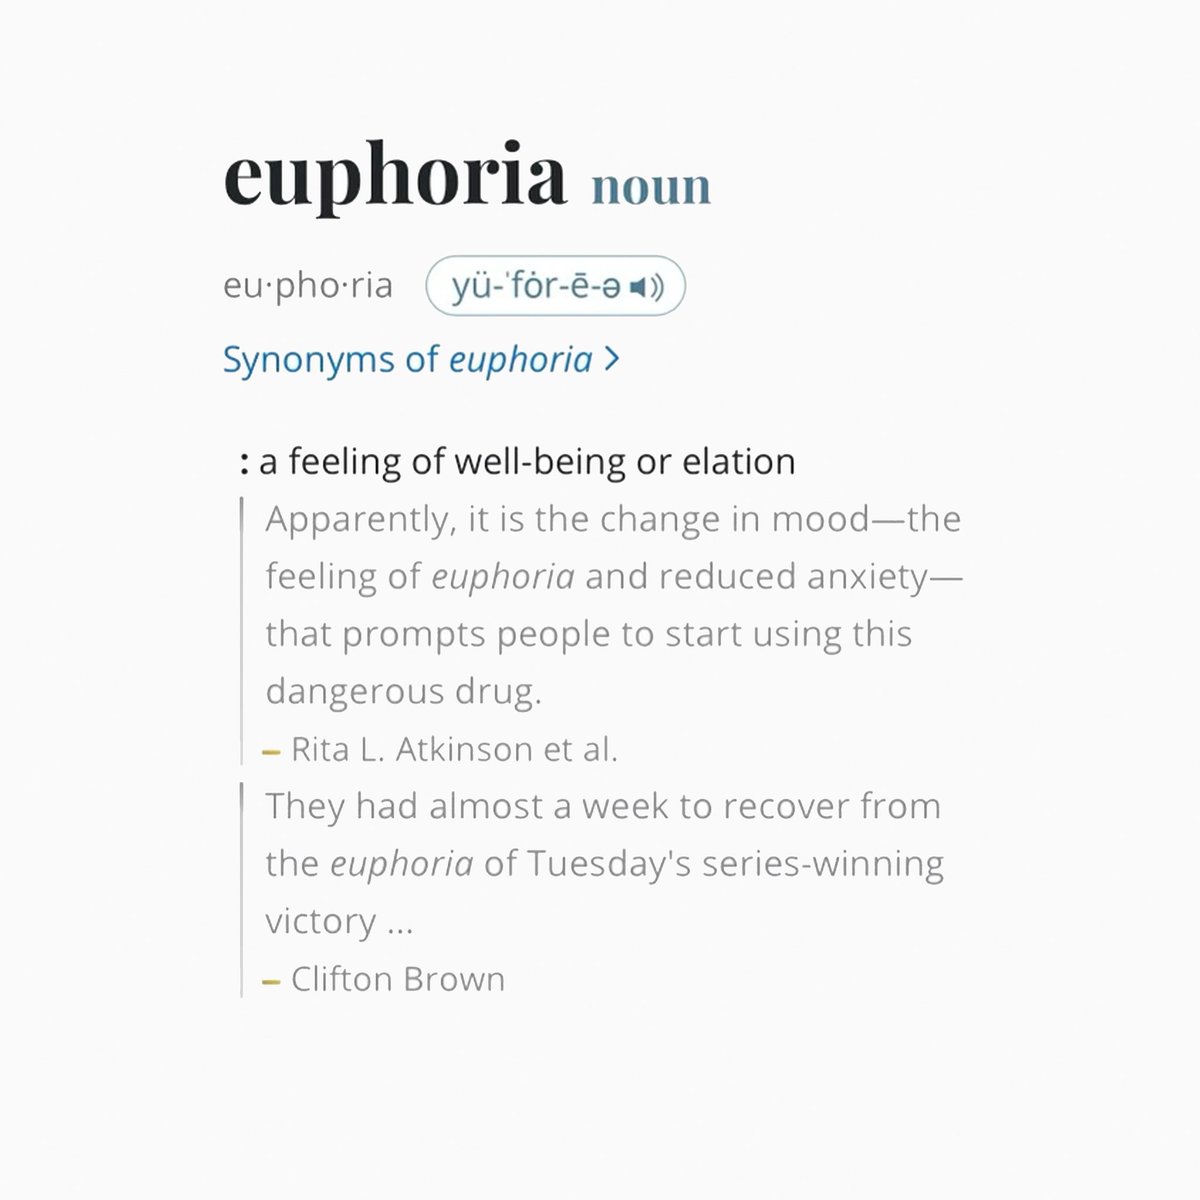 “They had almost a week to recover from the euphoria of Tuesday’s series-winning victory” - “Euphoria” dropped on Tuesday - “6:16 in LA” drops 3 days later…